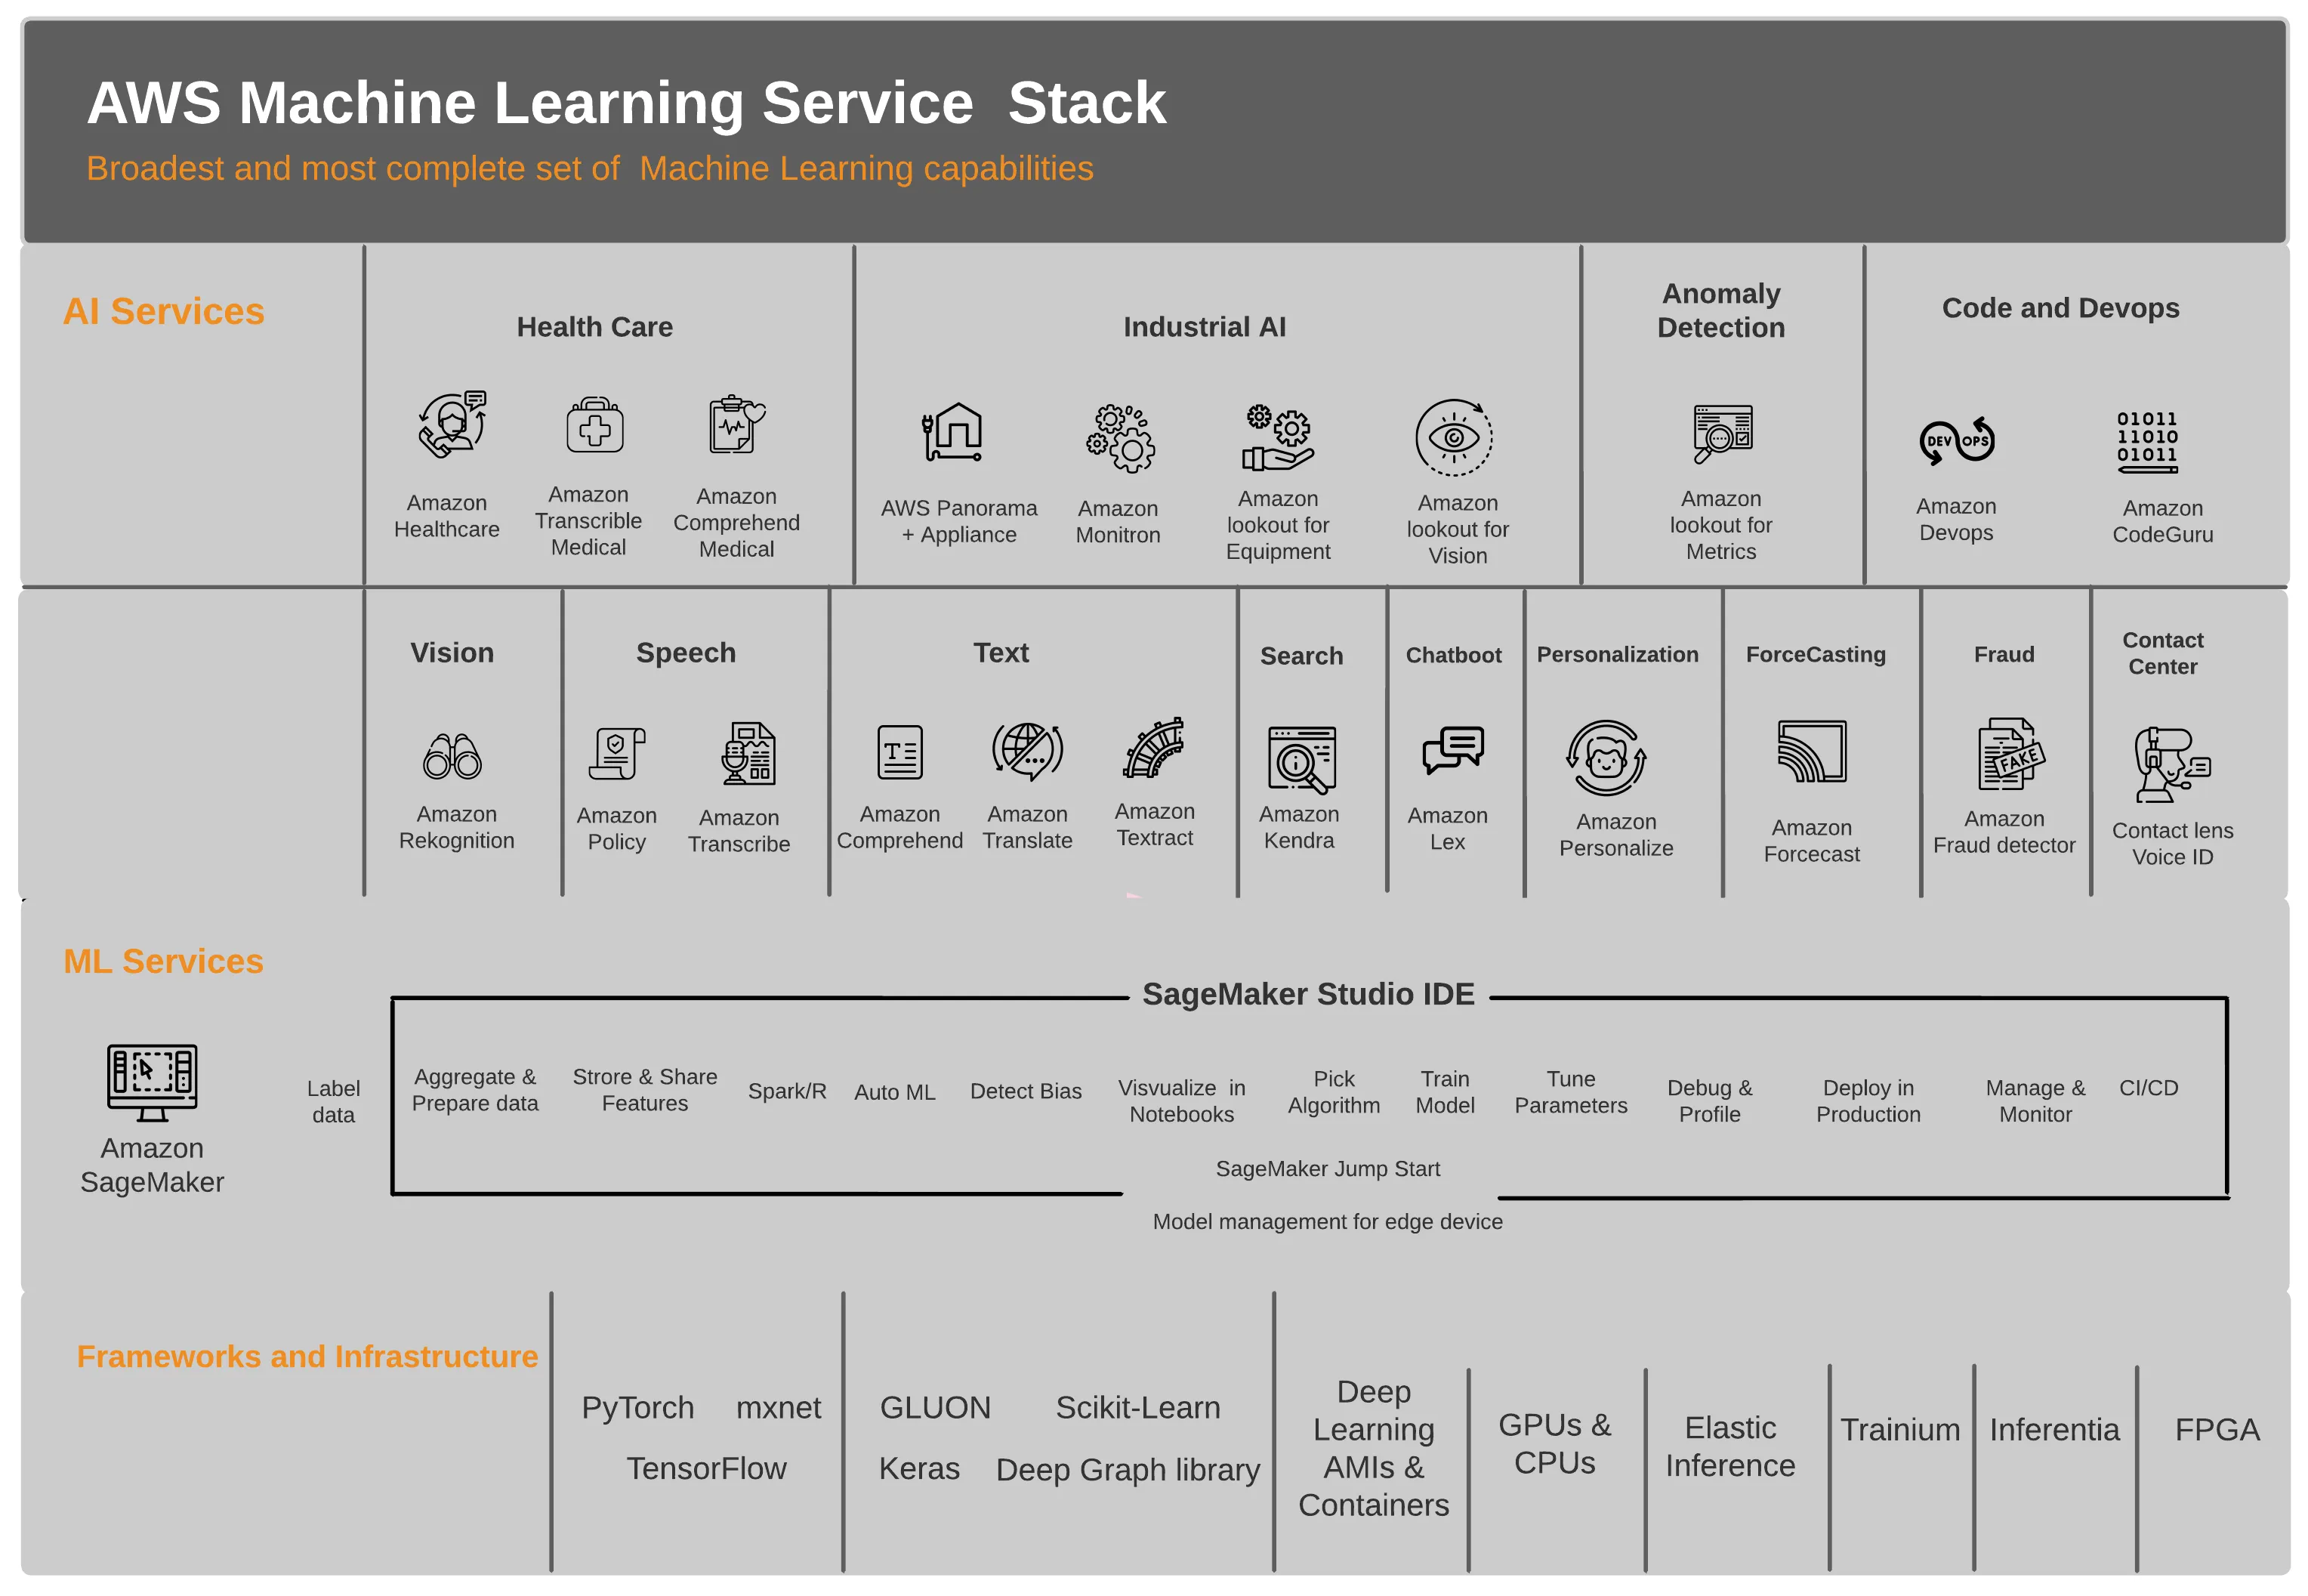 AWS Machine Learning Stack